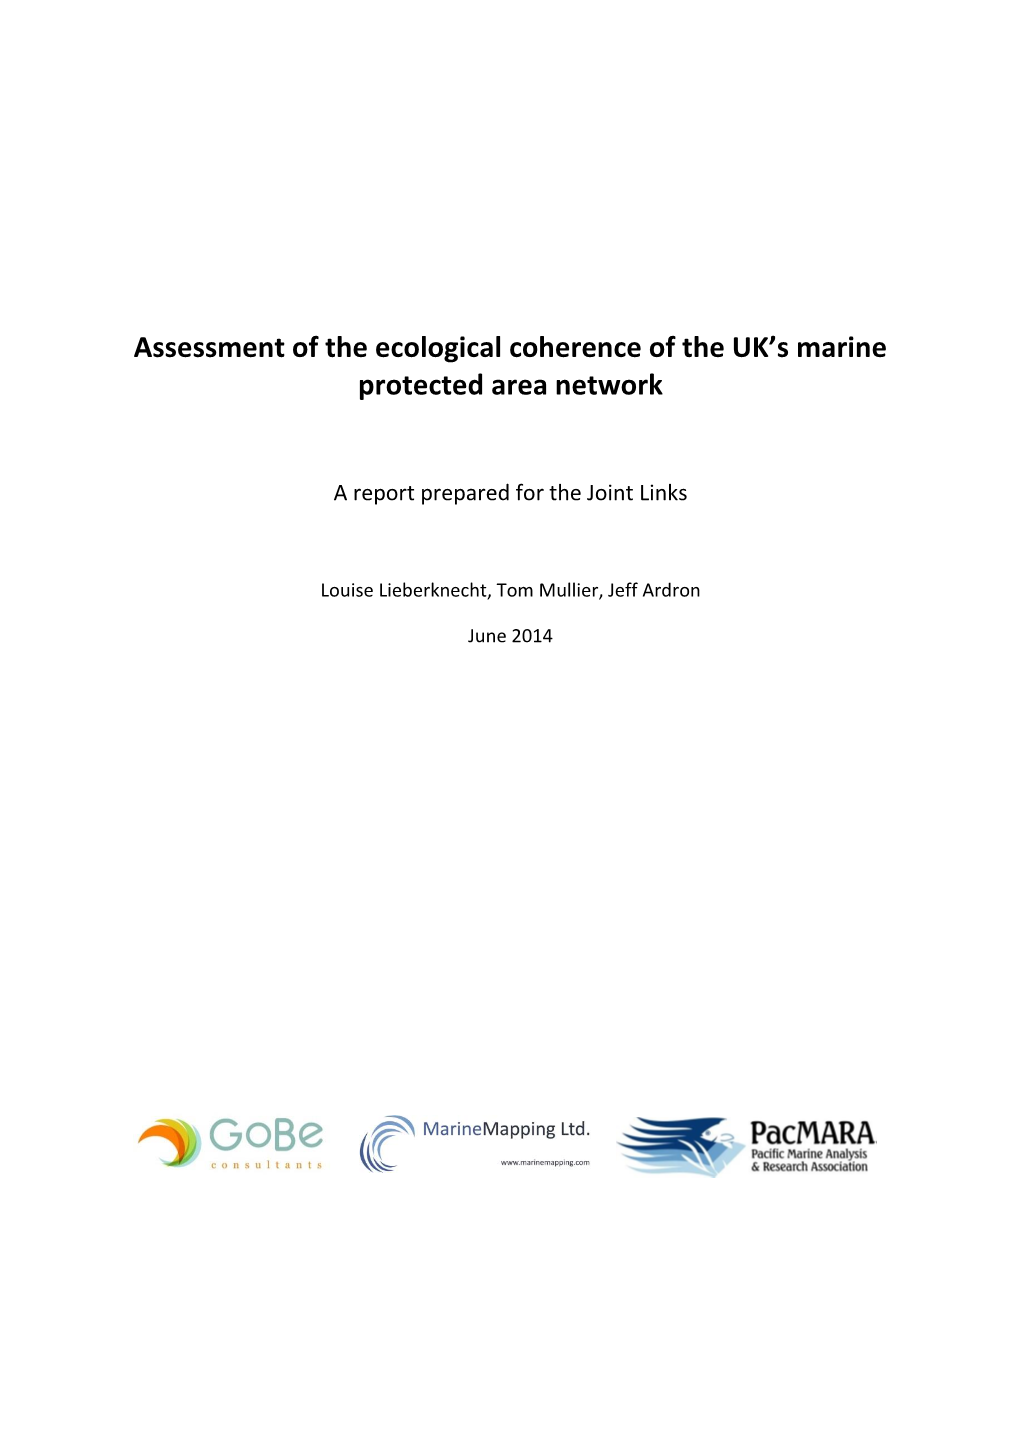 Assessment of the Ecological Coherence of the UK's Marine